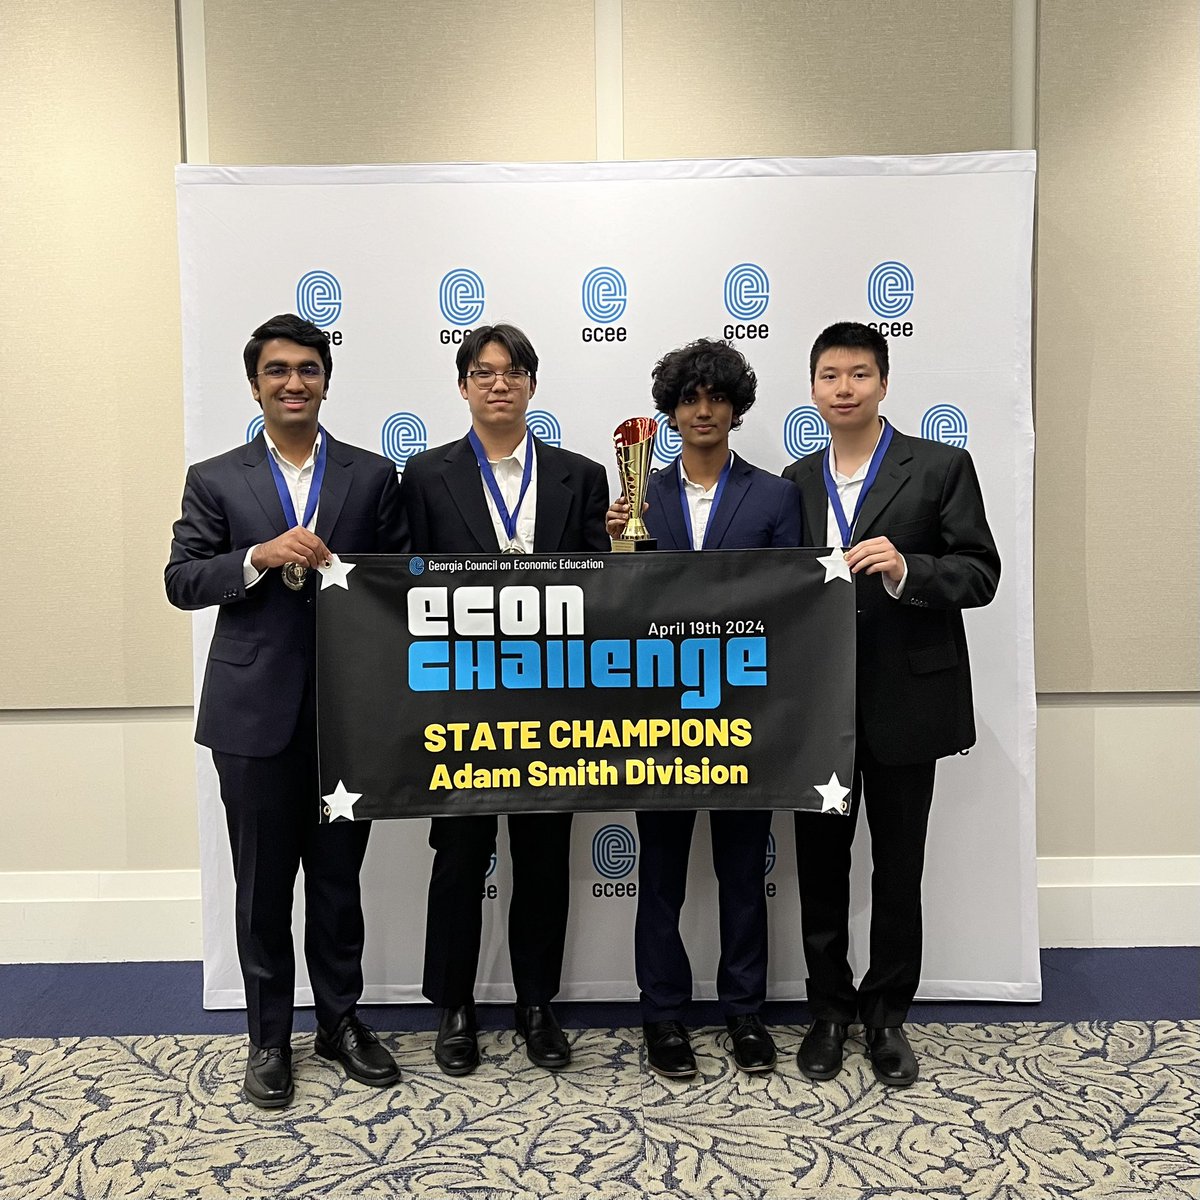 Your 2024 GA Econ Challenge champions (Adam Smith Division) from Walton High school. @Cobb_SS 

Thank you to the @AtlantaFed for hosting!